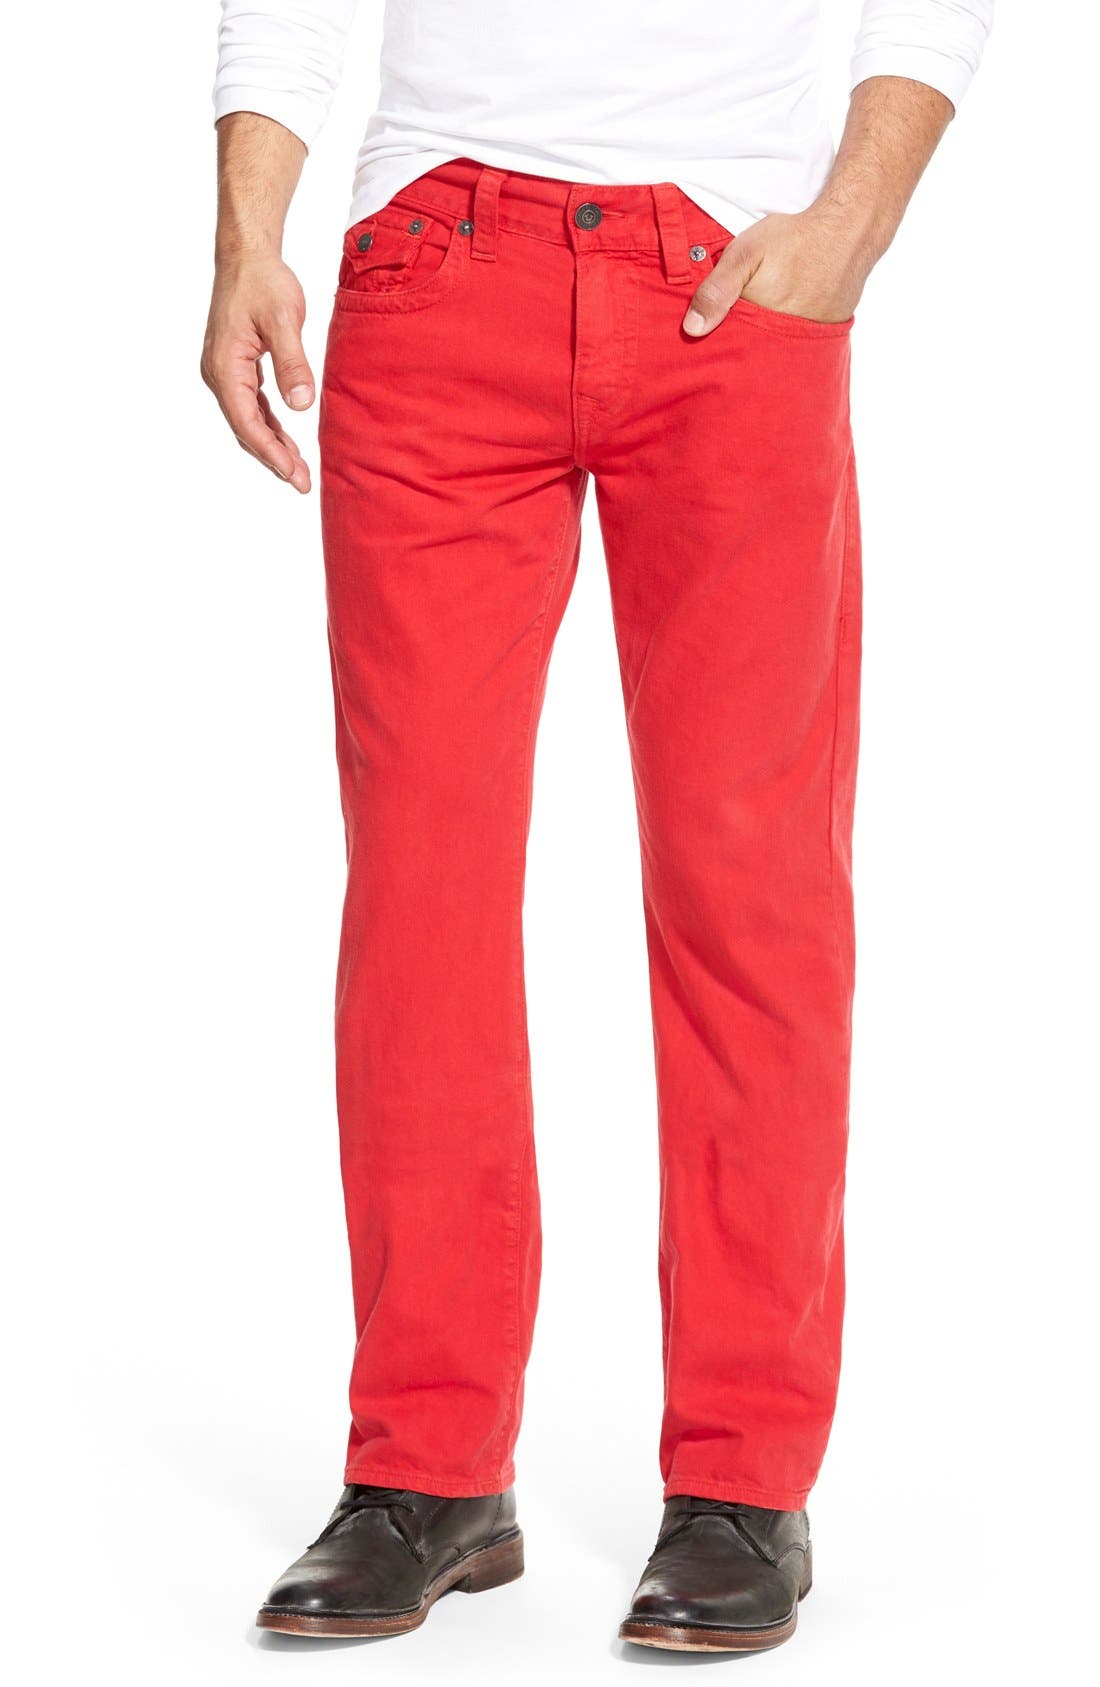 red button jeans relaxed